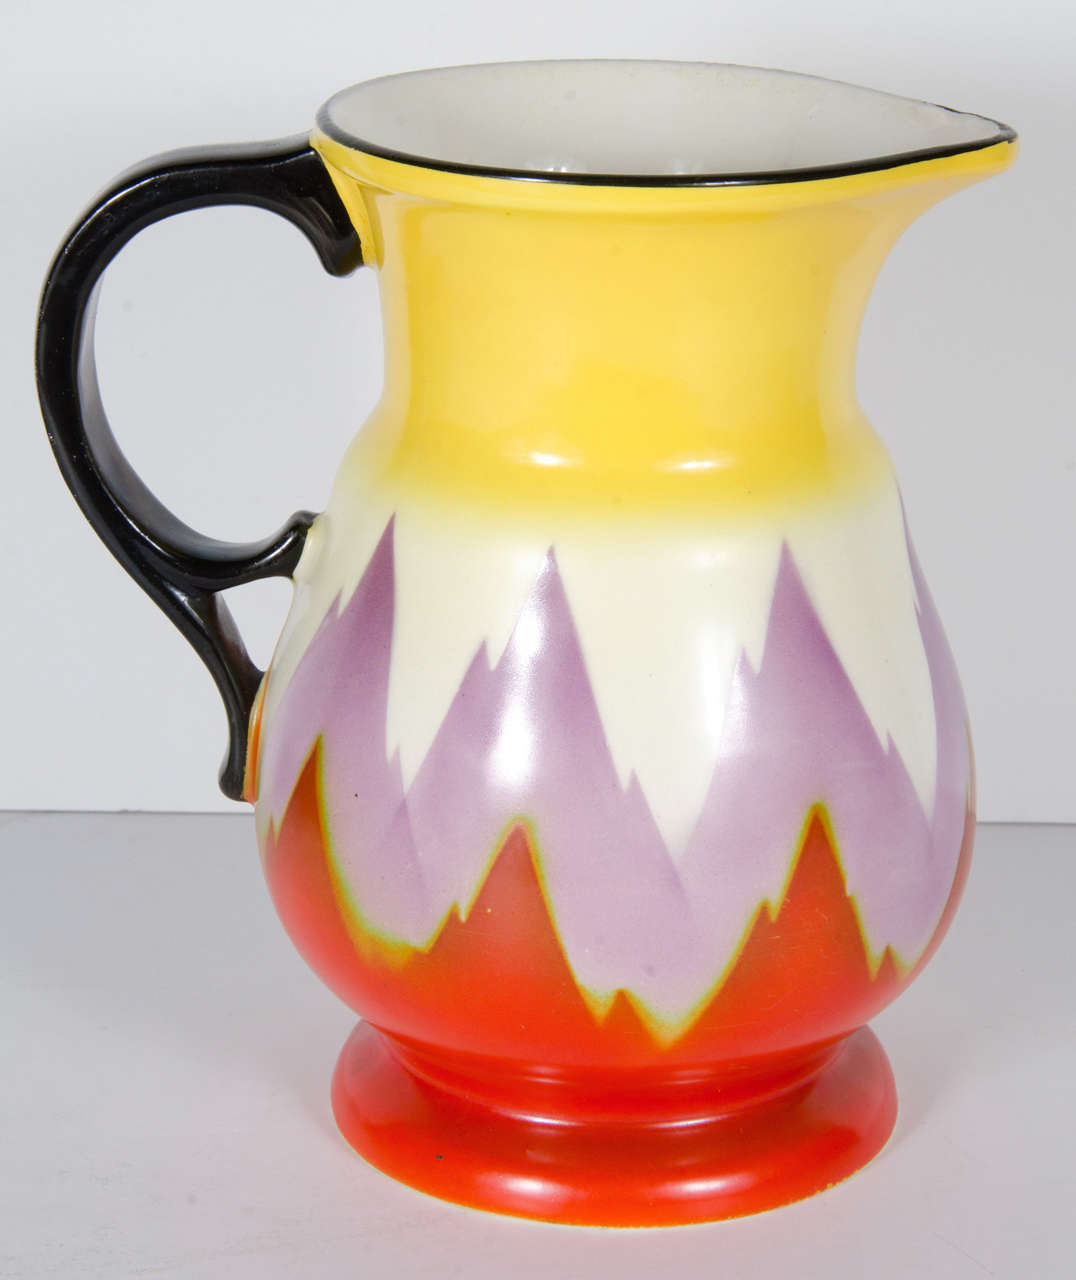 Art Deco pitcher by Ditmar Urbach from Czechoslovakia, Circa 1930.  Hand-painted with hues of red, purple and yellow giving it it's skyscraper flame design.